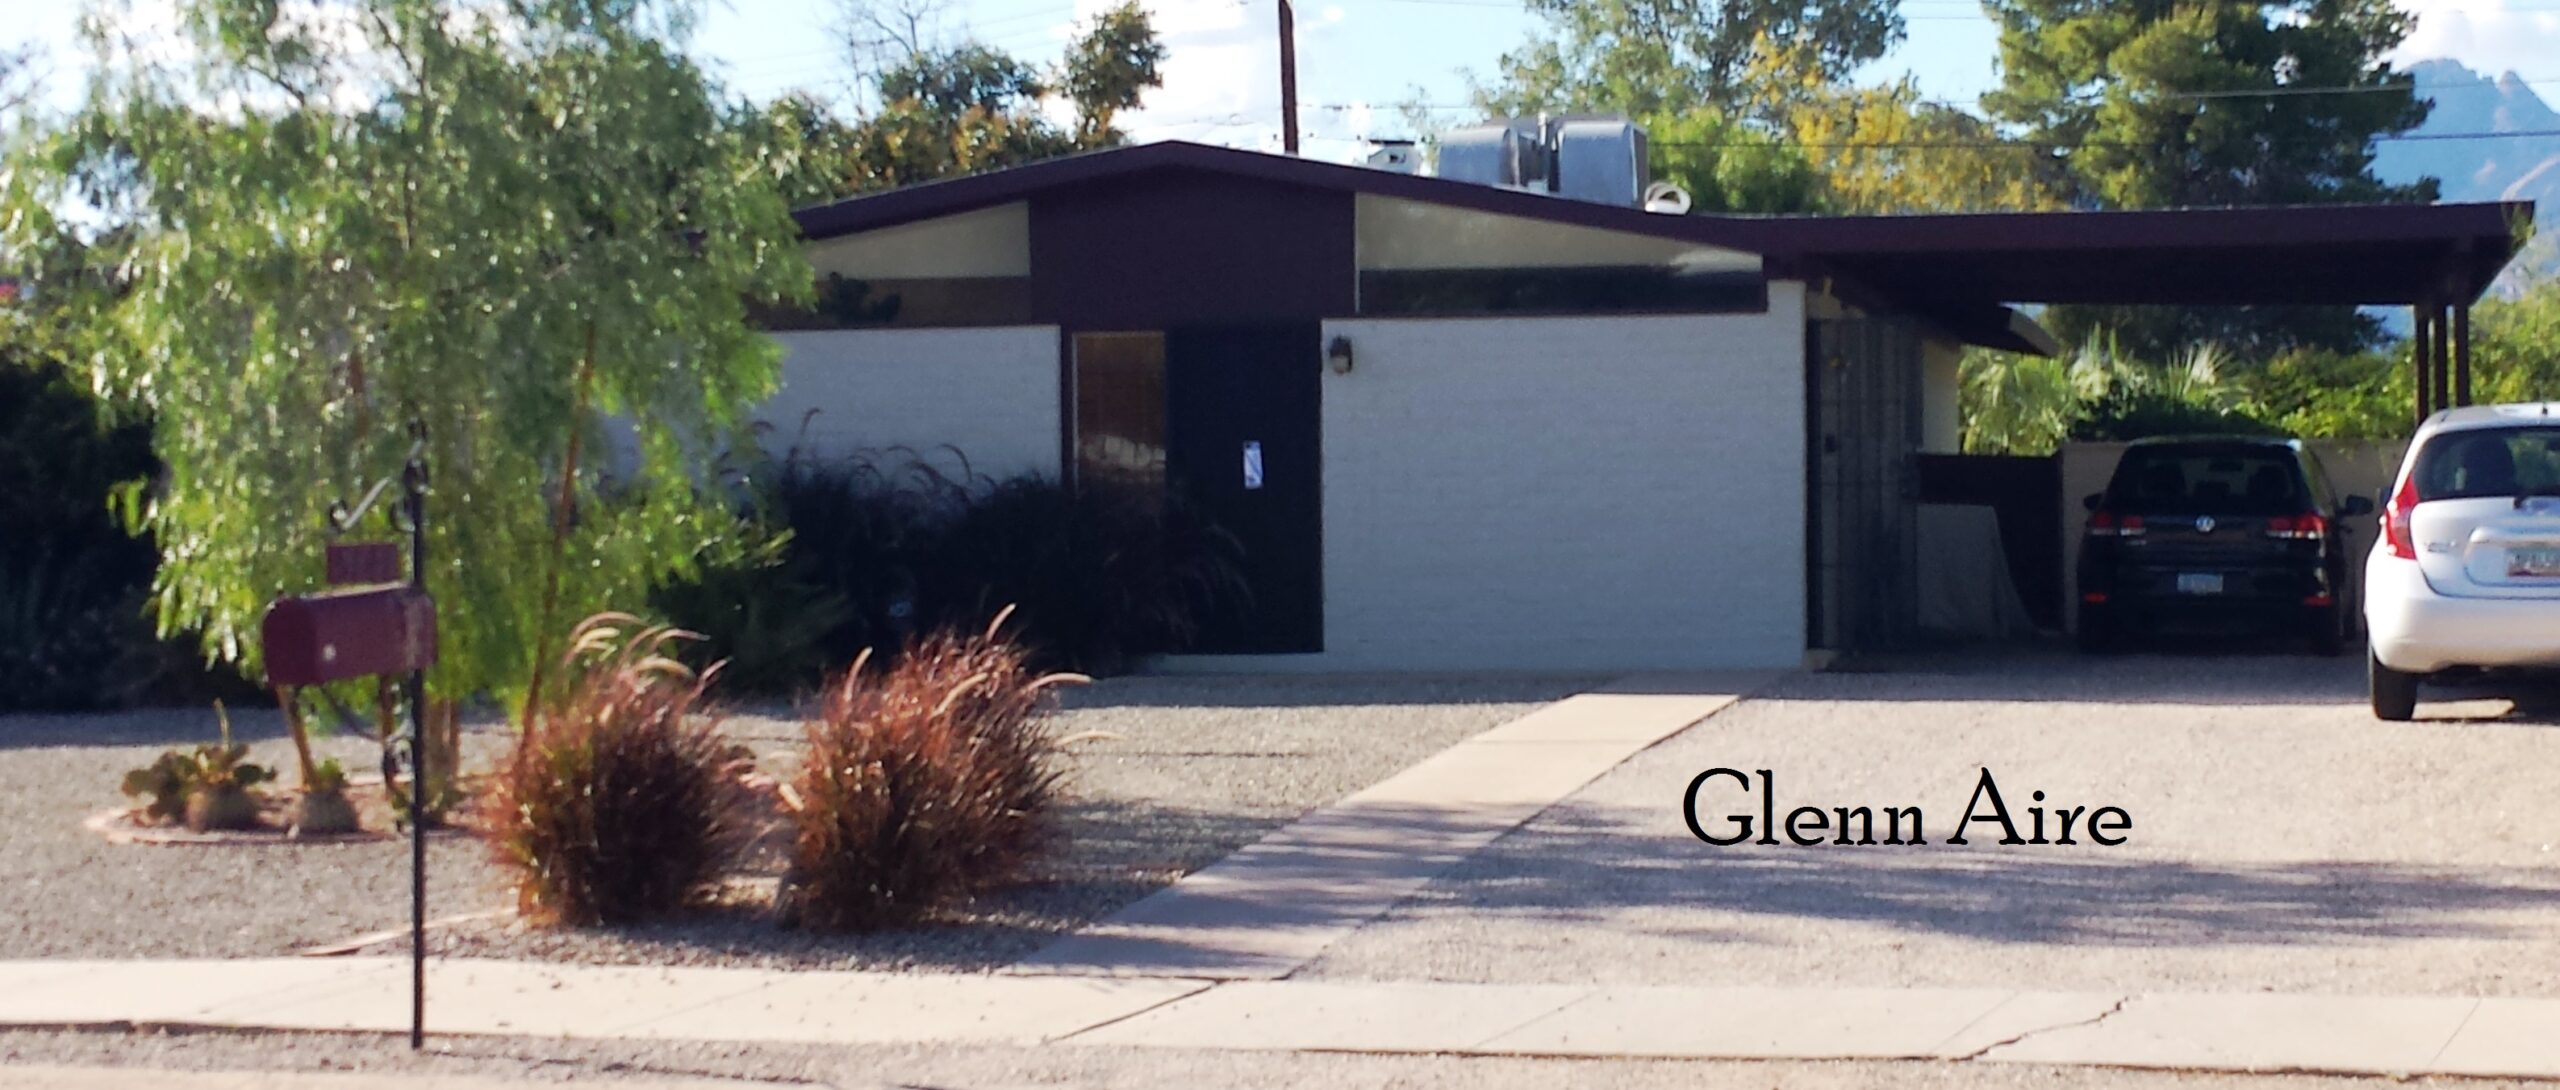 Glenn Aire home in Tucson's midtown area